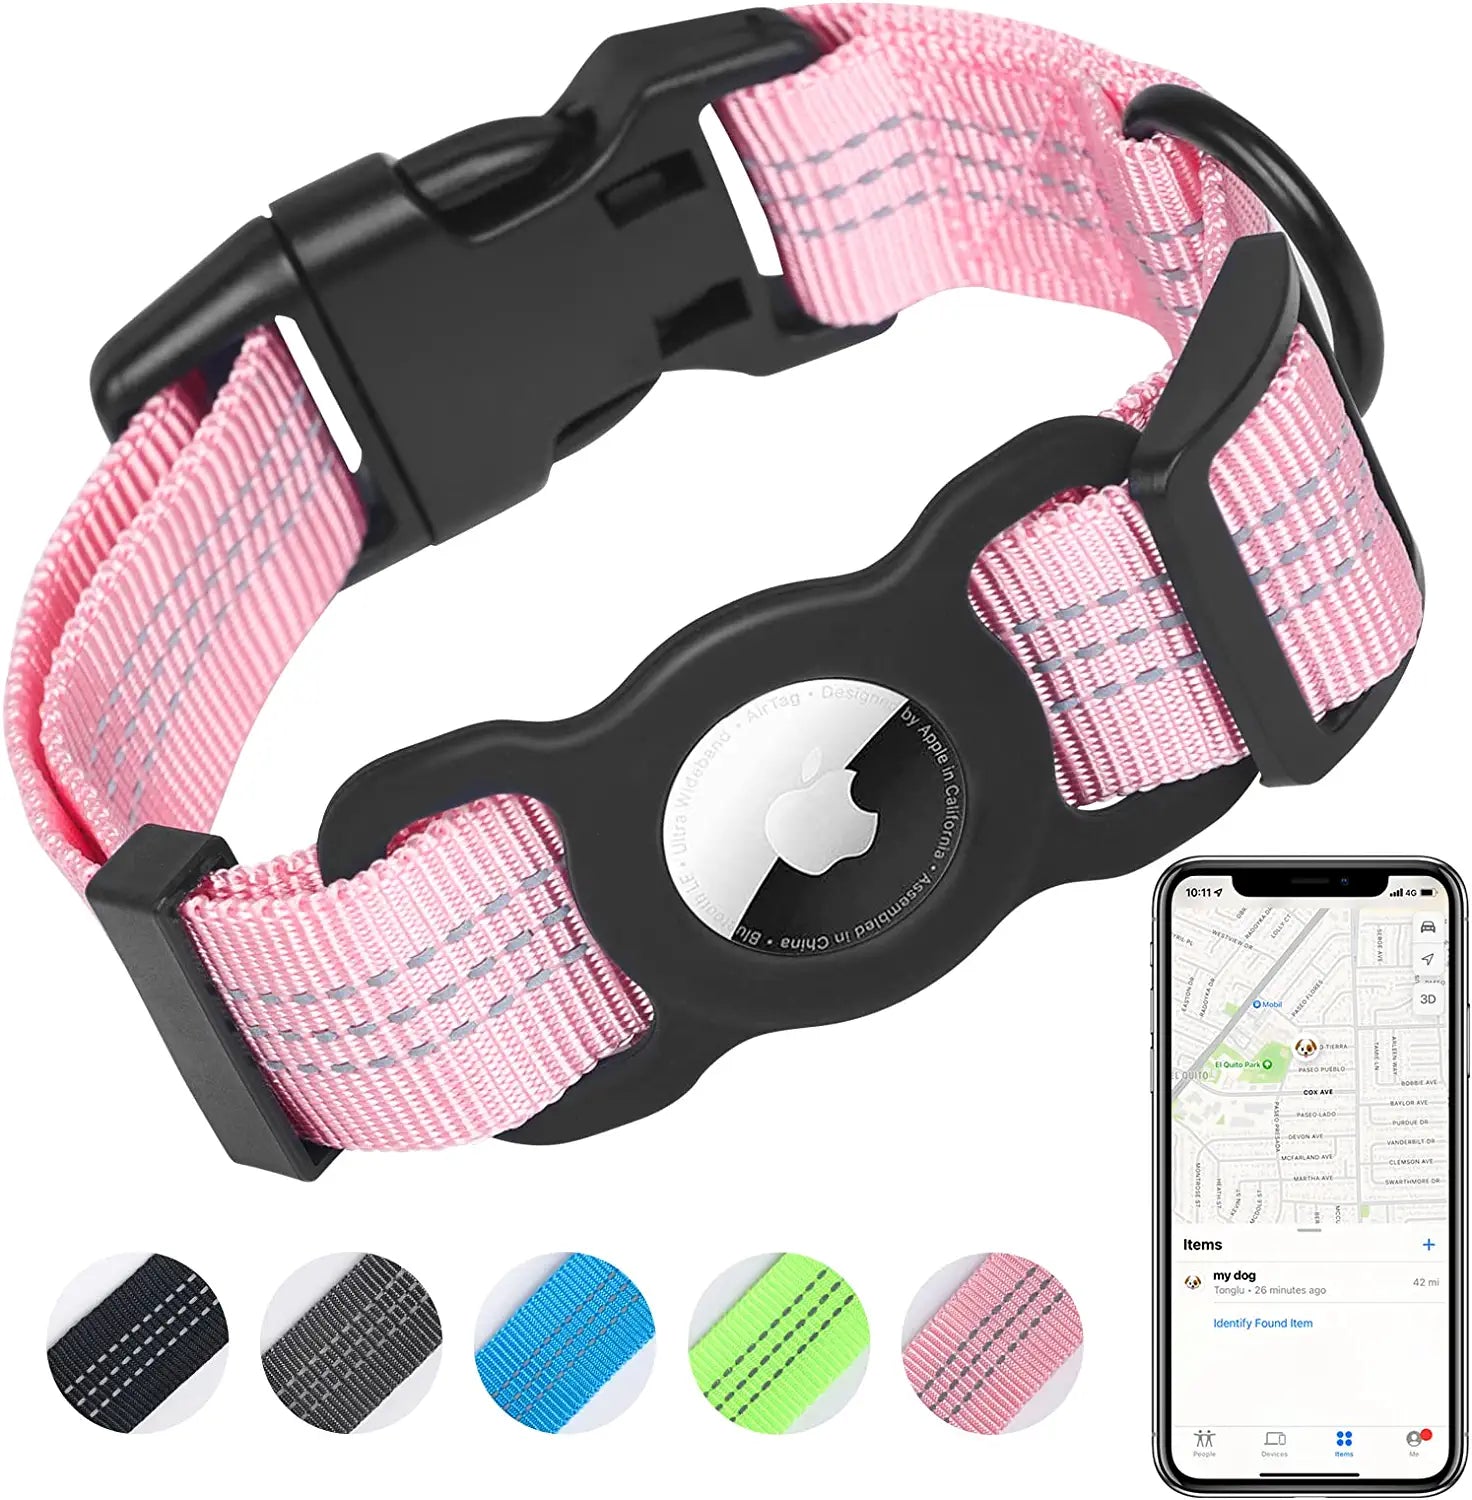 Airtag Dog Collar, Integrated Airtag Holder, for Iphone Positioning, Outdoor Activitiesanti-Lost, Reflective Apple Airtag Dog Collar, Sturdy and Durable, Dog Collar That Fits Most Dogs. (M, Black)